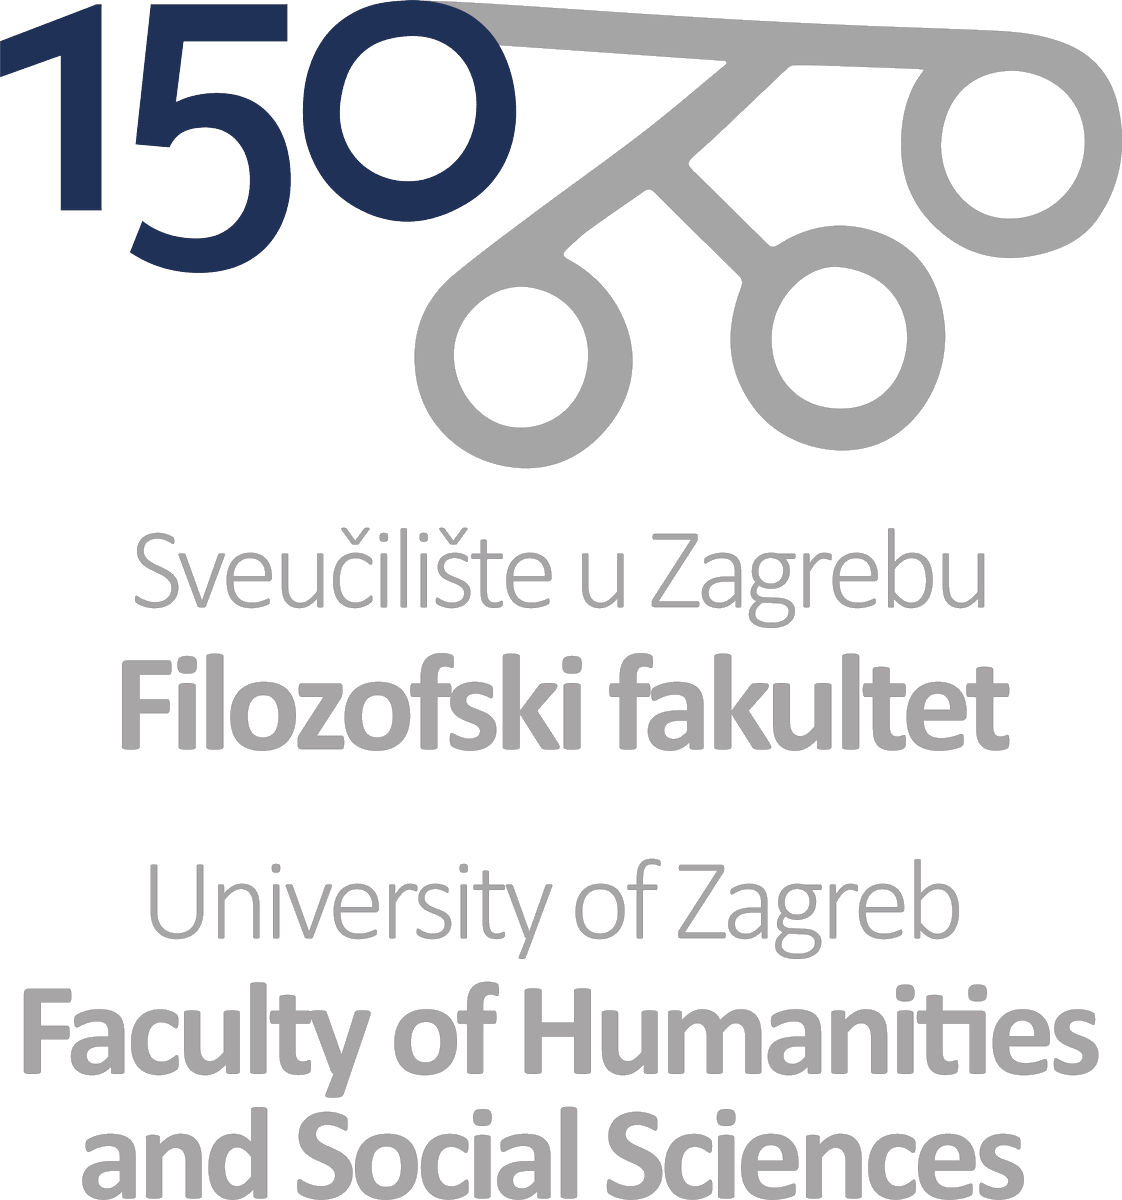 The Faculty of Humanities and Social Sciences from the University of Zagreb (@SveucilisteZG) is now an official support of @PeerCommunityIn Do you think your Faculty or University could support our #openscience initiative too? Contact us for help if needed!